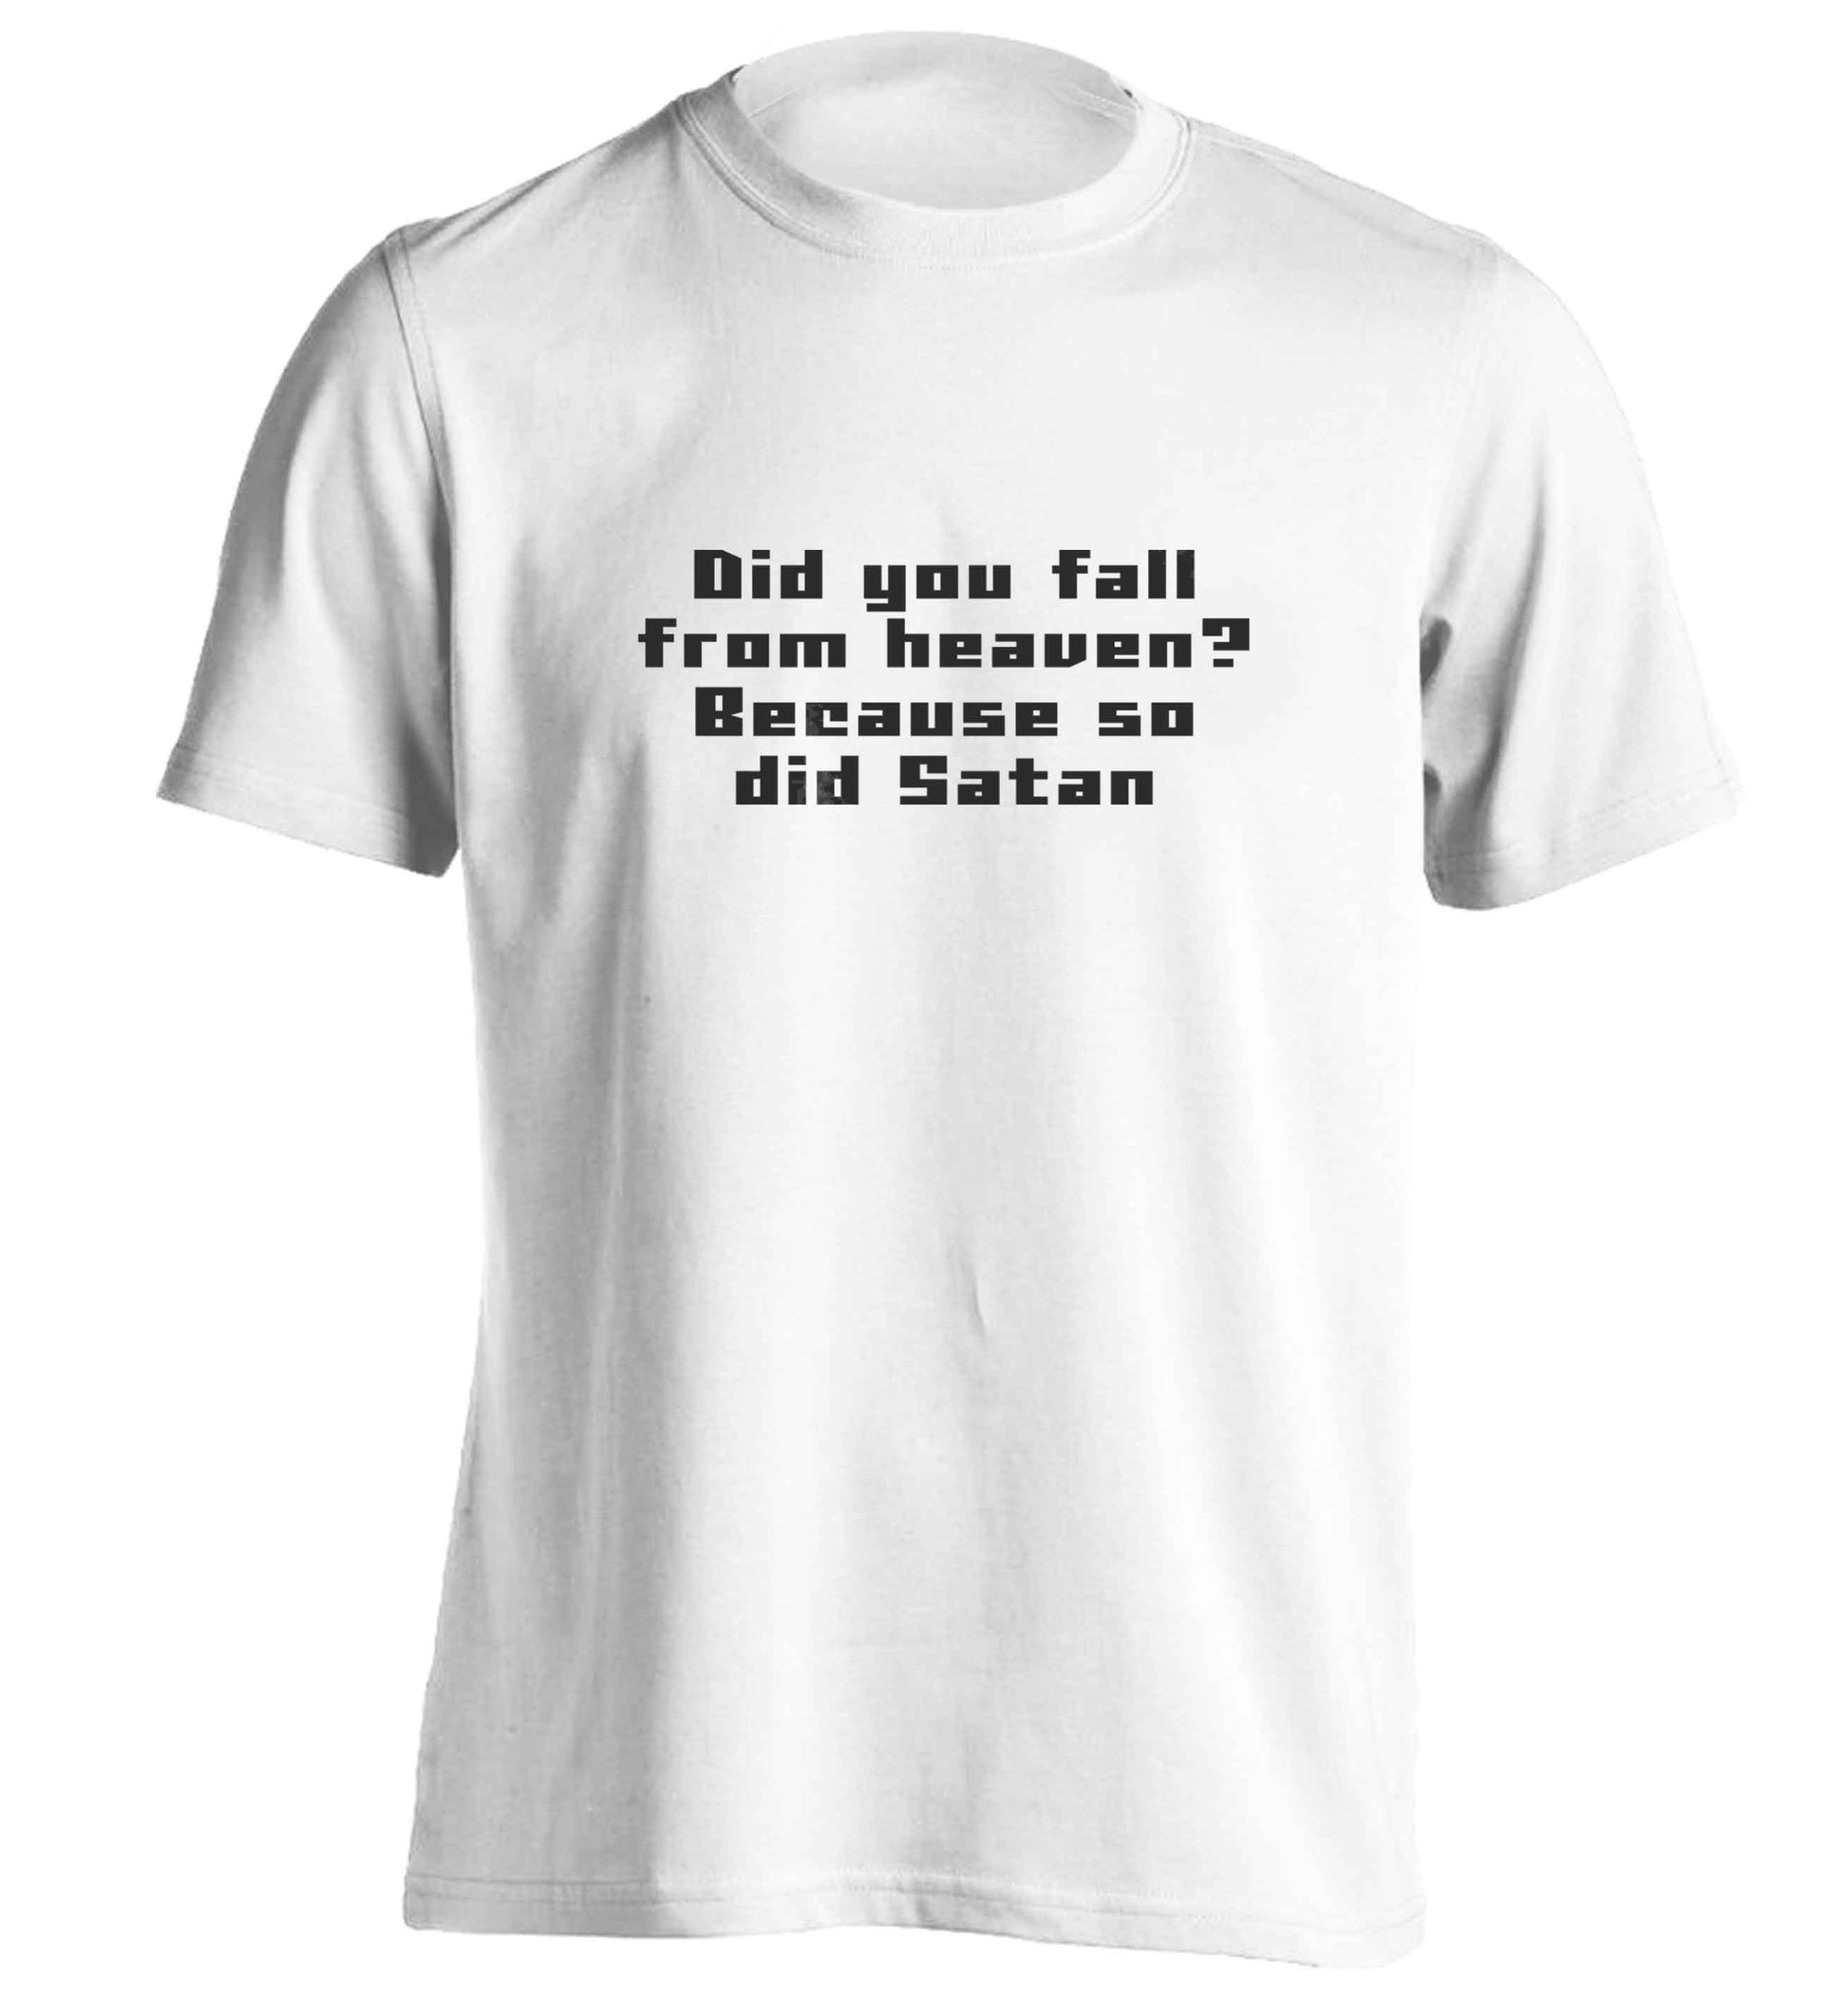 Did you fall from Heaven because so did Satan adults unisex white Tshirt 2XL